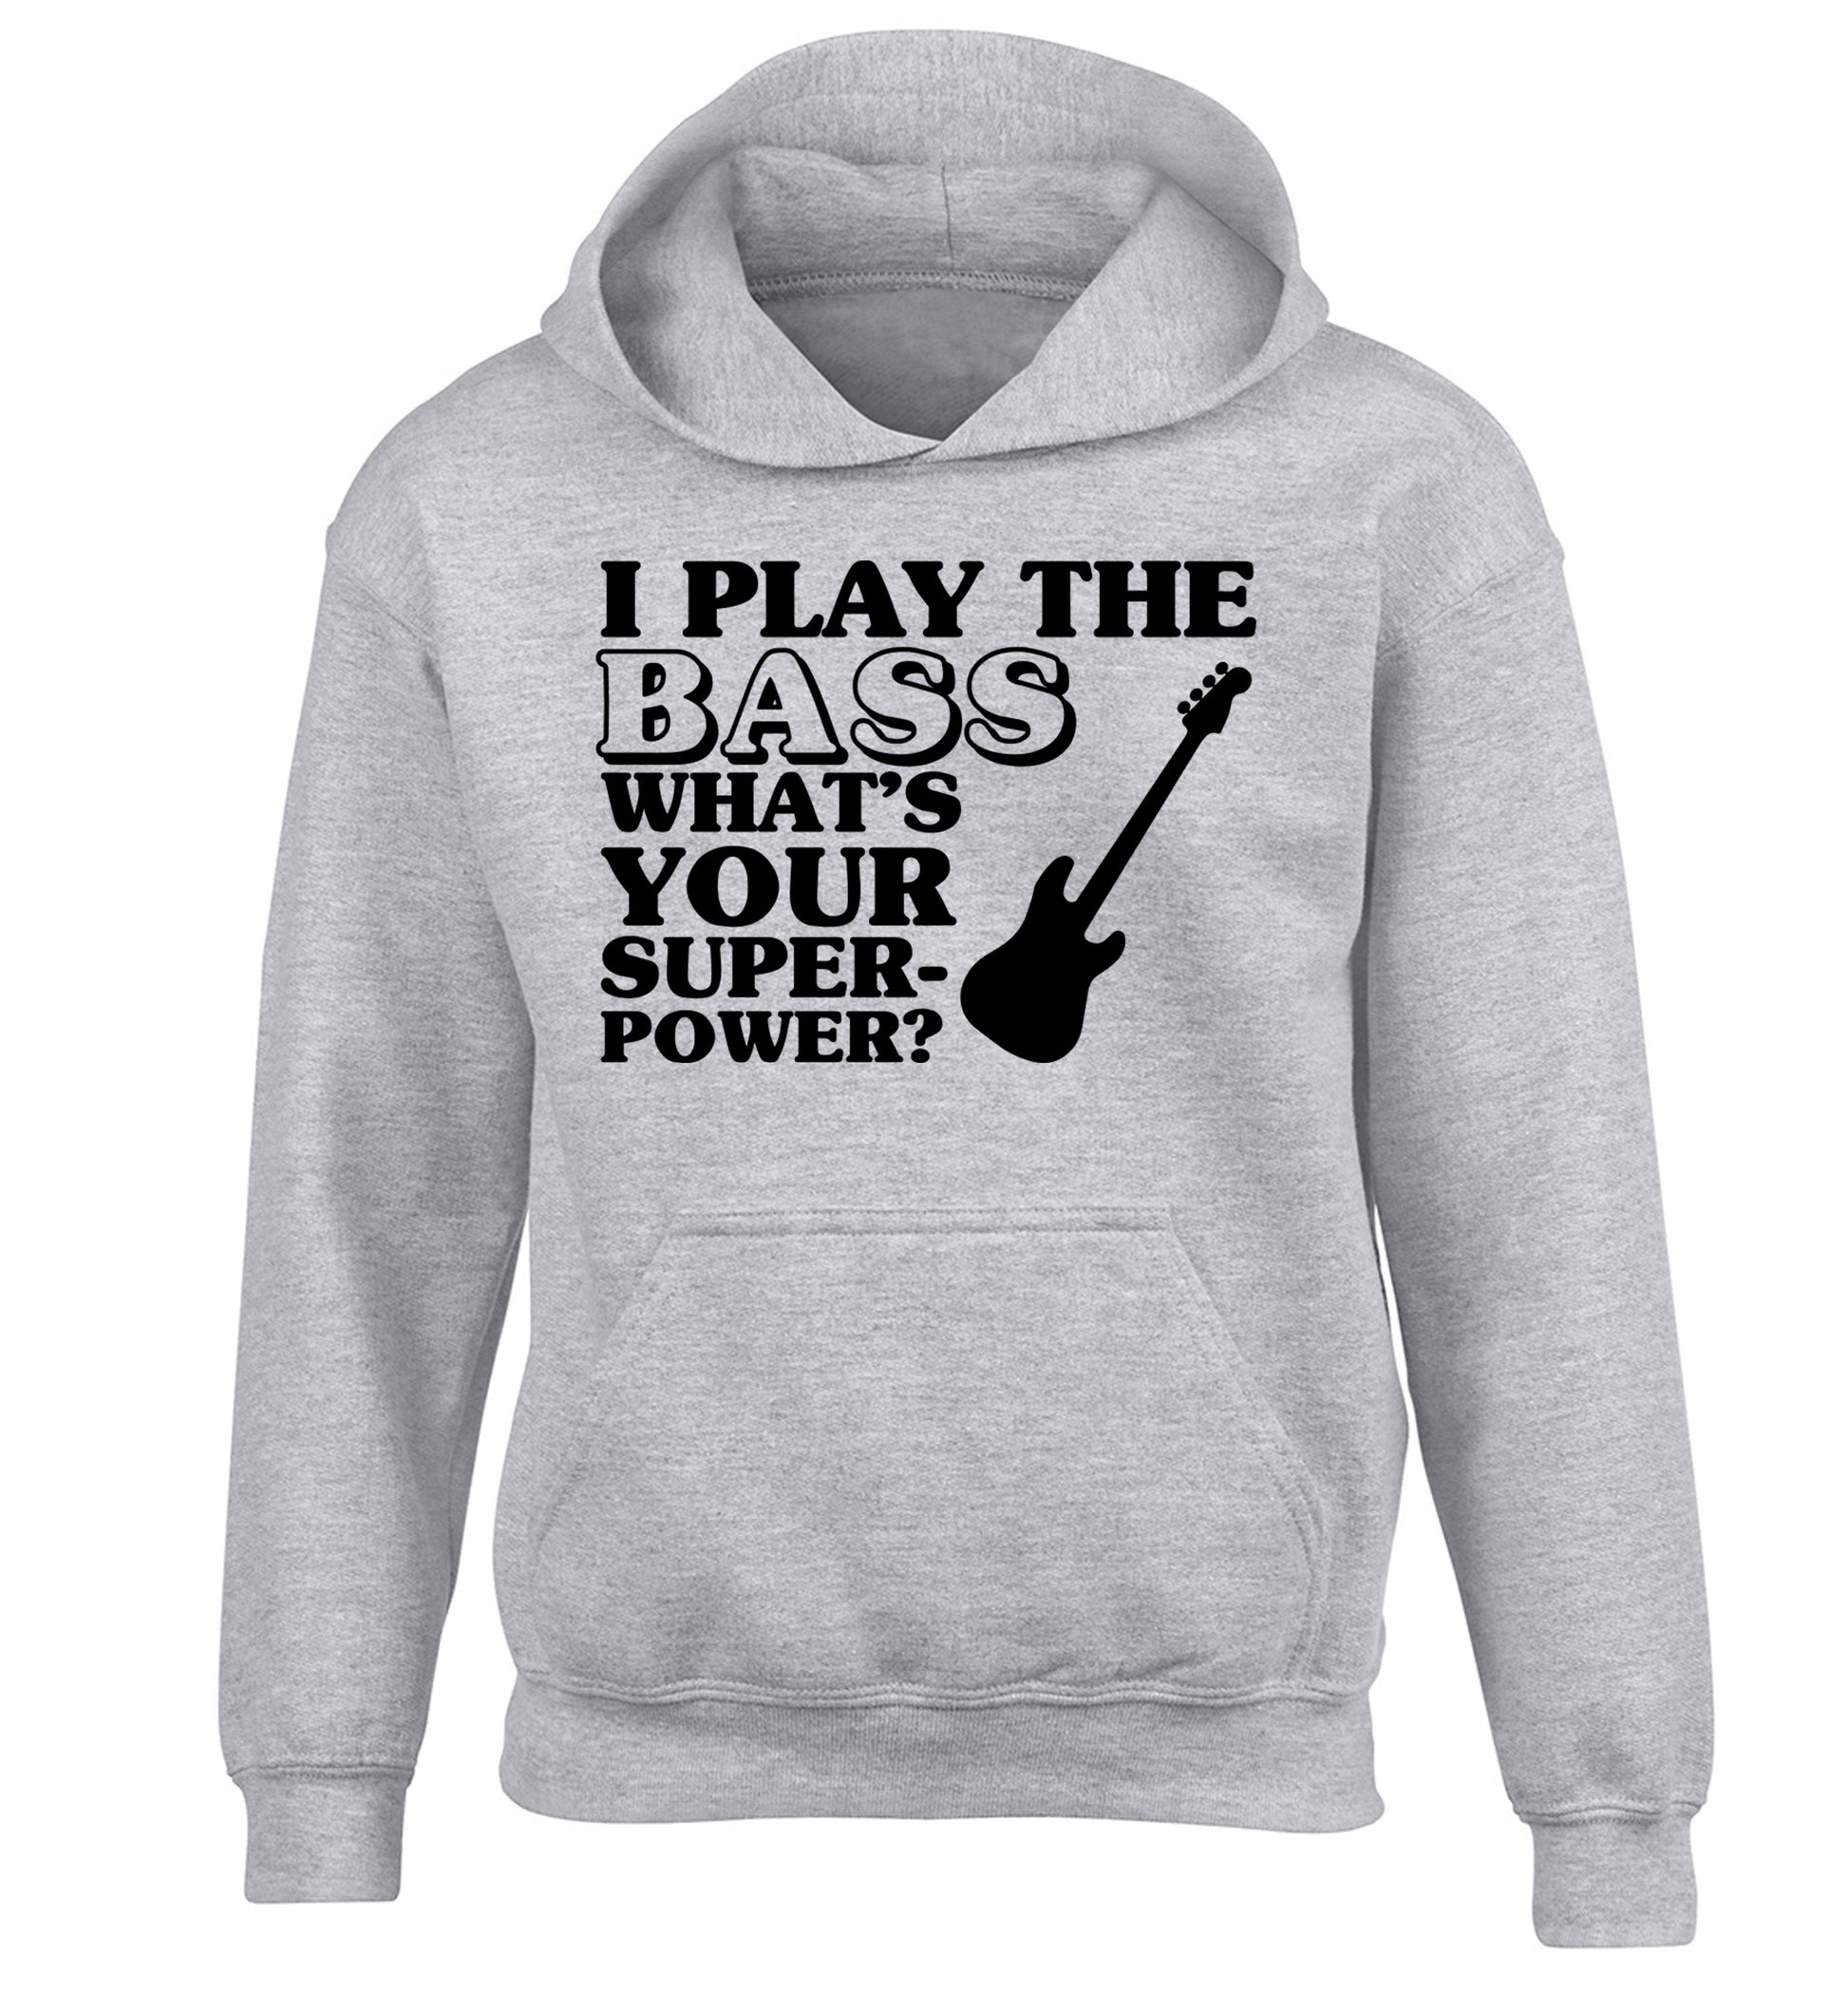 I play the bass what's your superpower? children's grey hoodie 12-14 Years